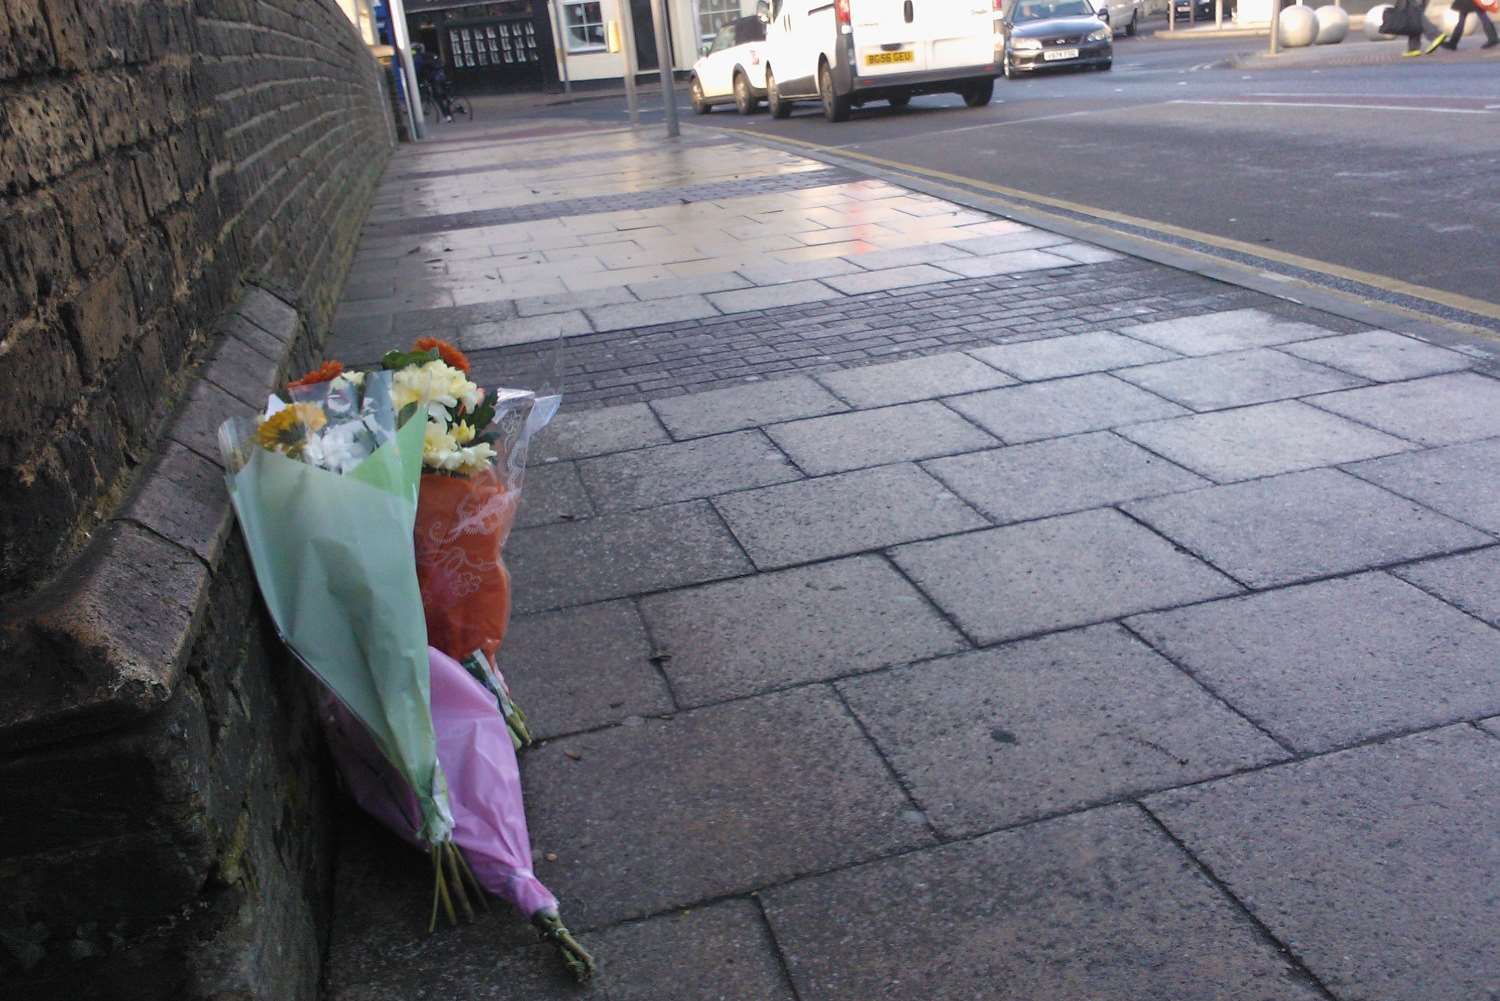 Flowers were left at the scene in the aftermath